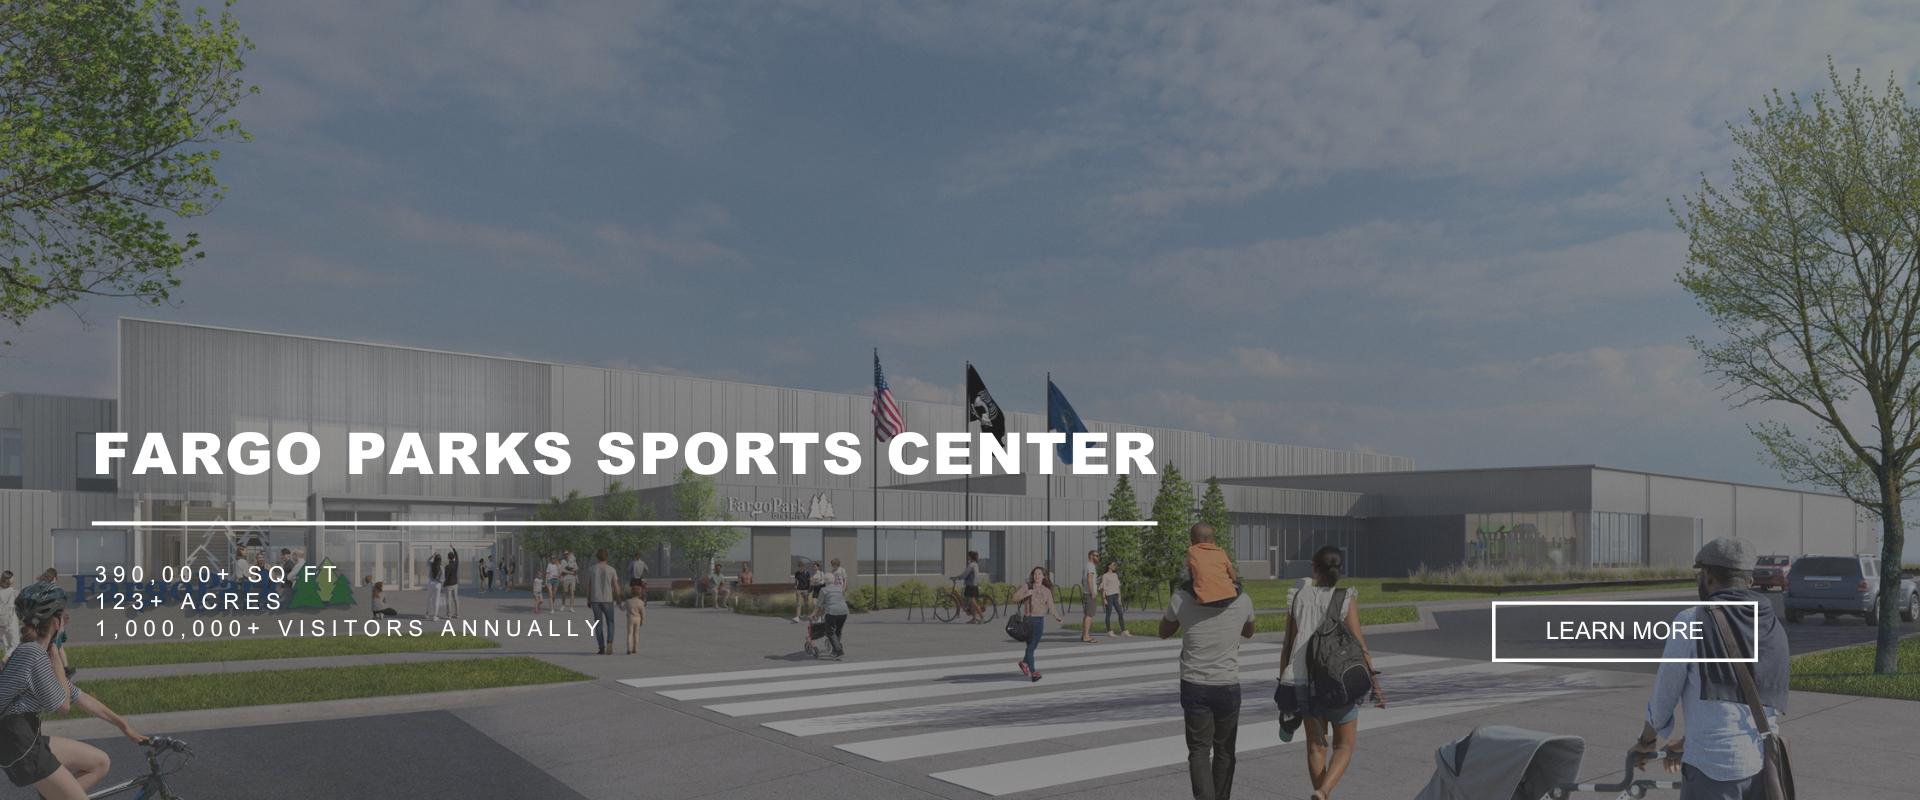 FARGO PARKS SPORTS CENTER - 390,000+ Sq Ft, 123+ Acres, 1,000,000 Visitors Annually - Rendering of the new Fargo Parks Sports Center building with people walking around the outside of the facility - Learn More button